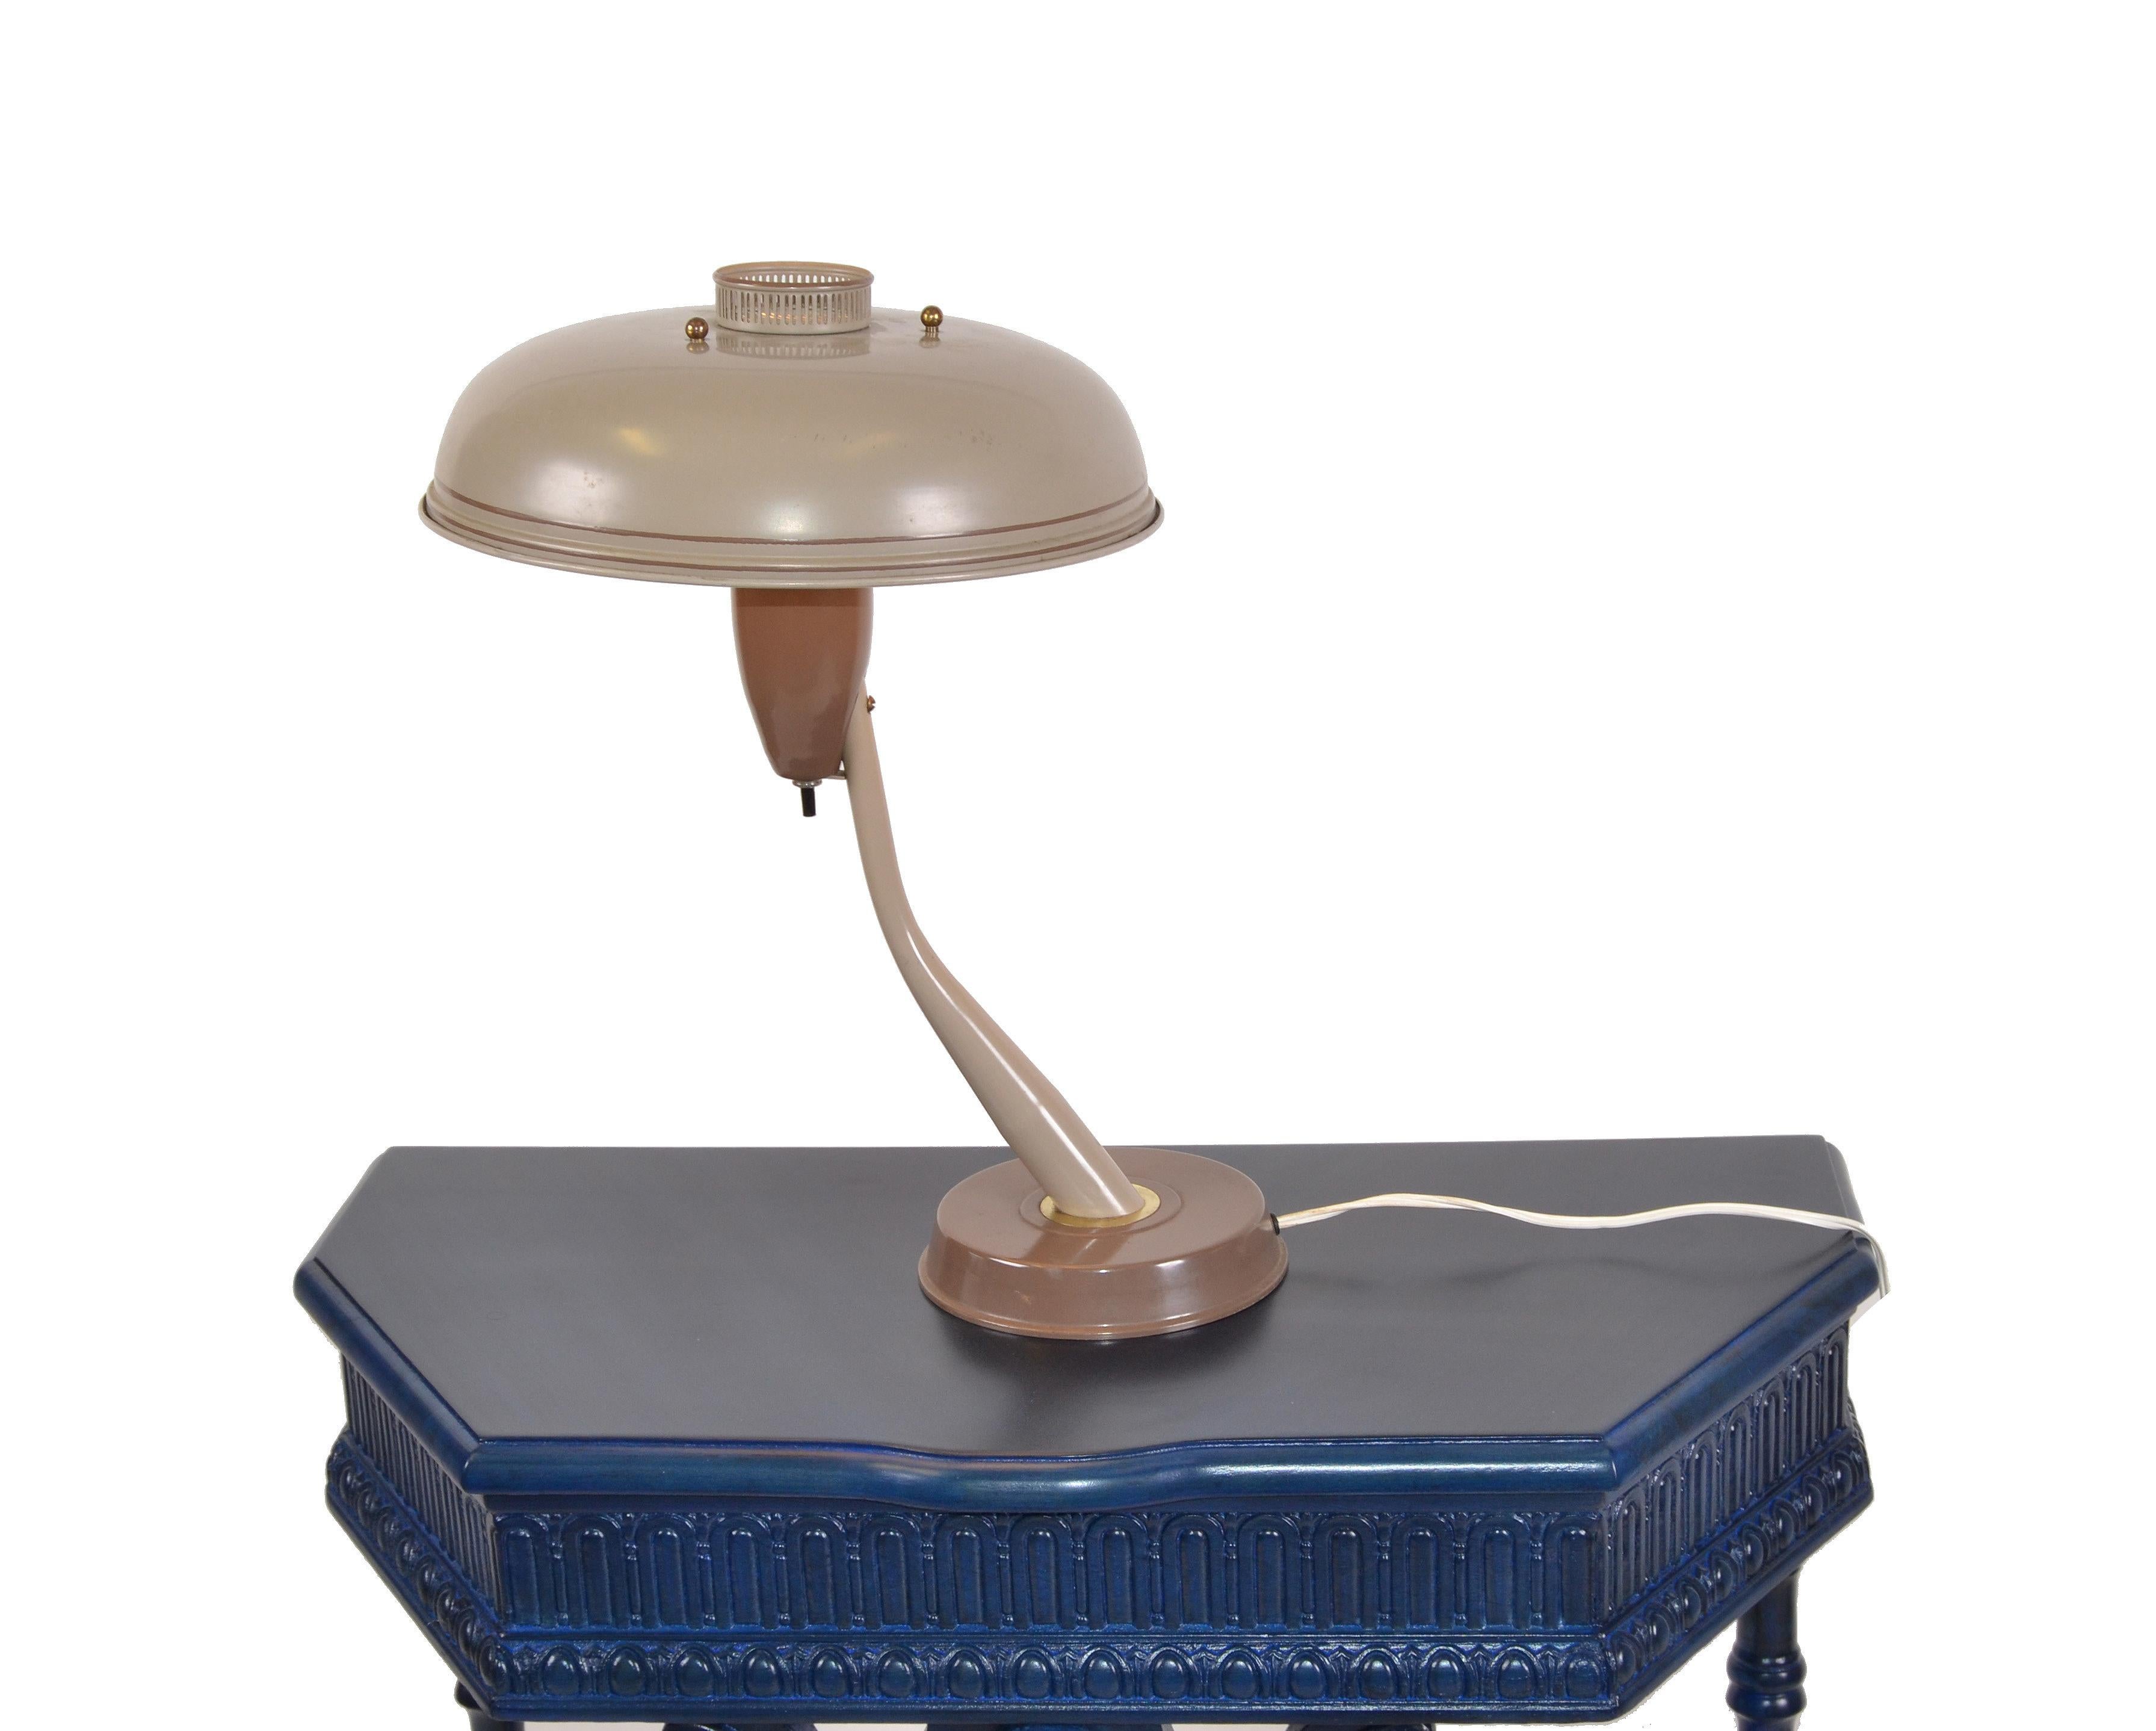  1950s Mid-Century Modern Space Age Brown Metal & Brass Flying Saucer Table Lamp For Sale 7